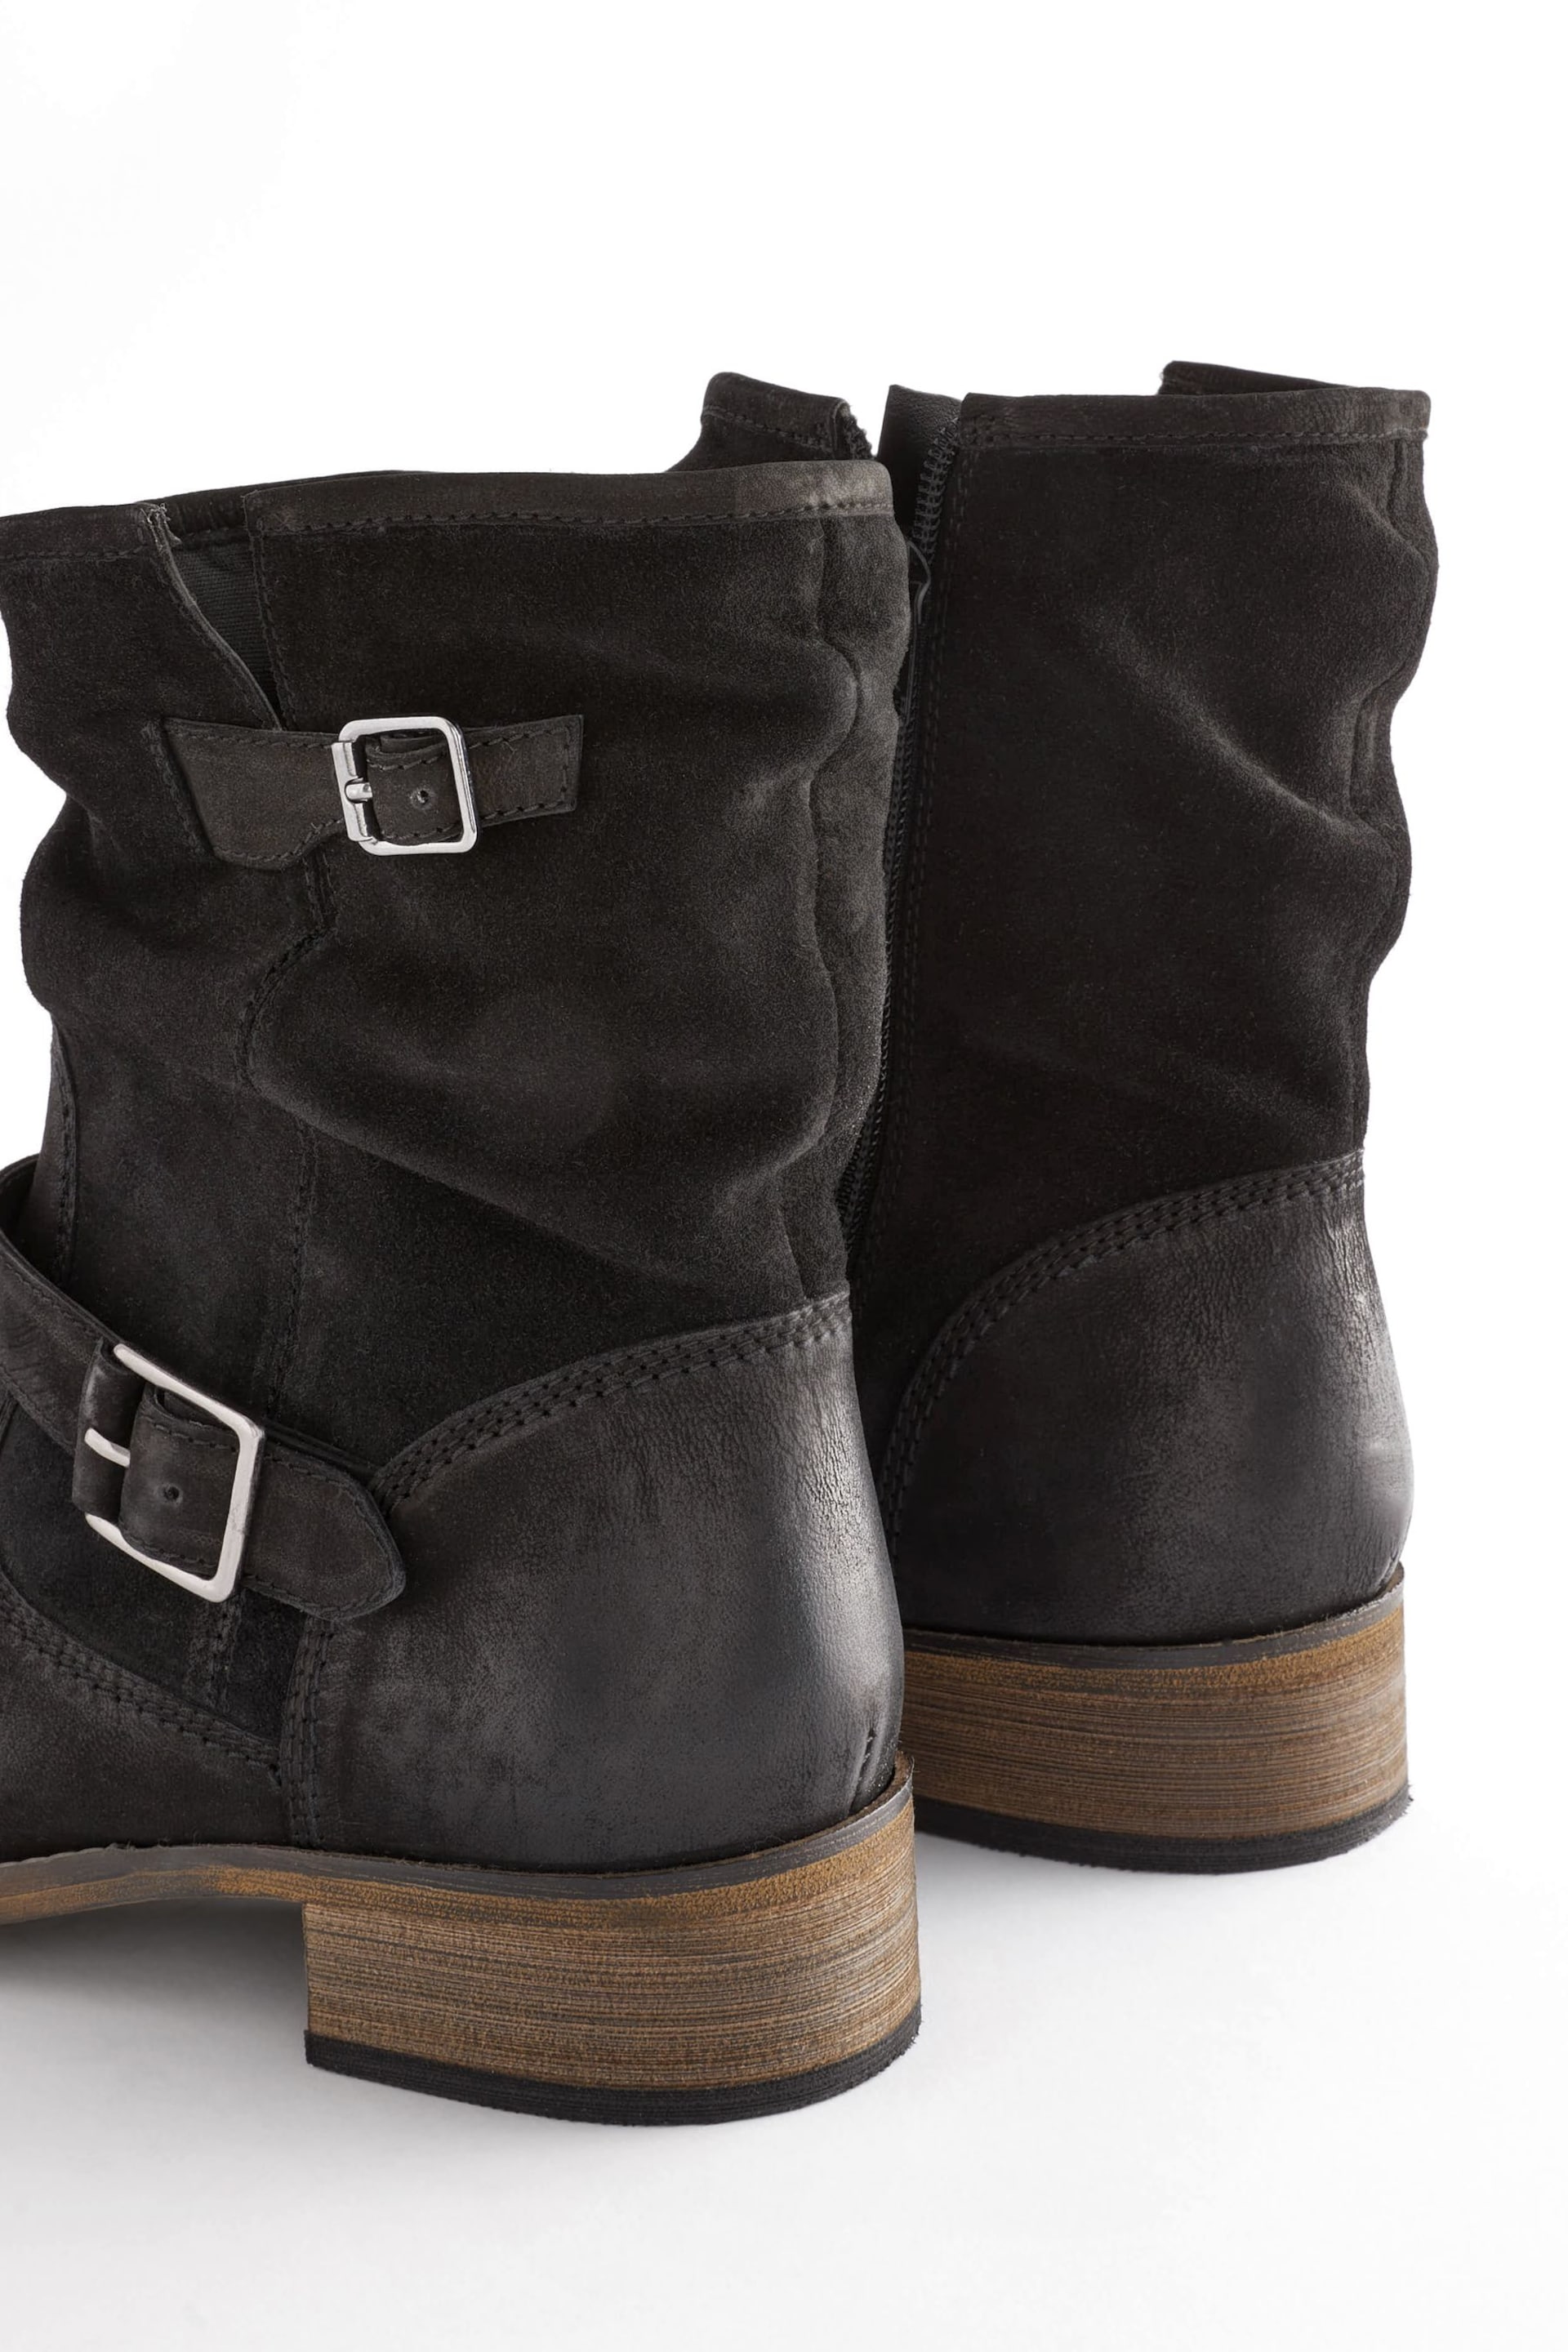 Black Regular/Wide Fit Forever Comfort® Leather Slouch Ankle Boots - Image 6 of 7